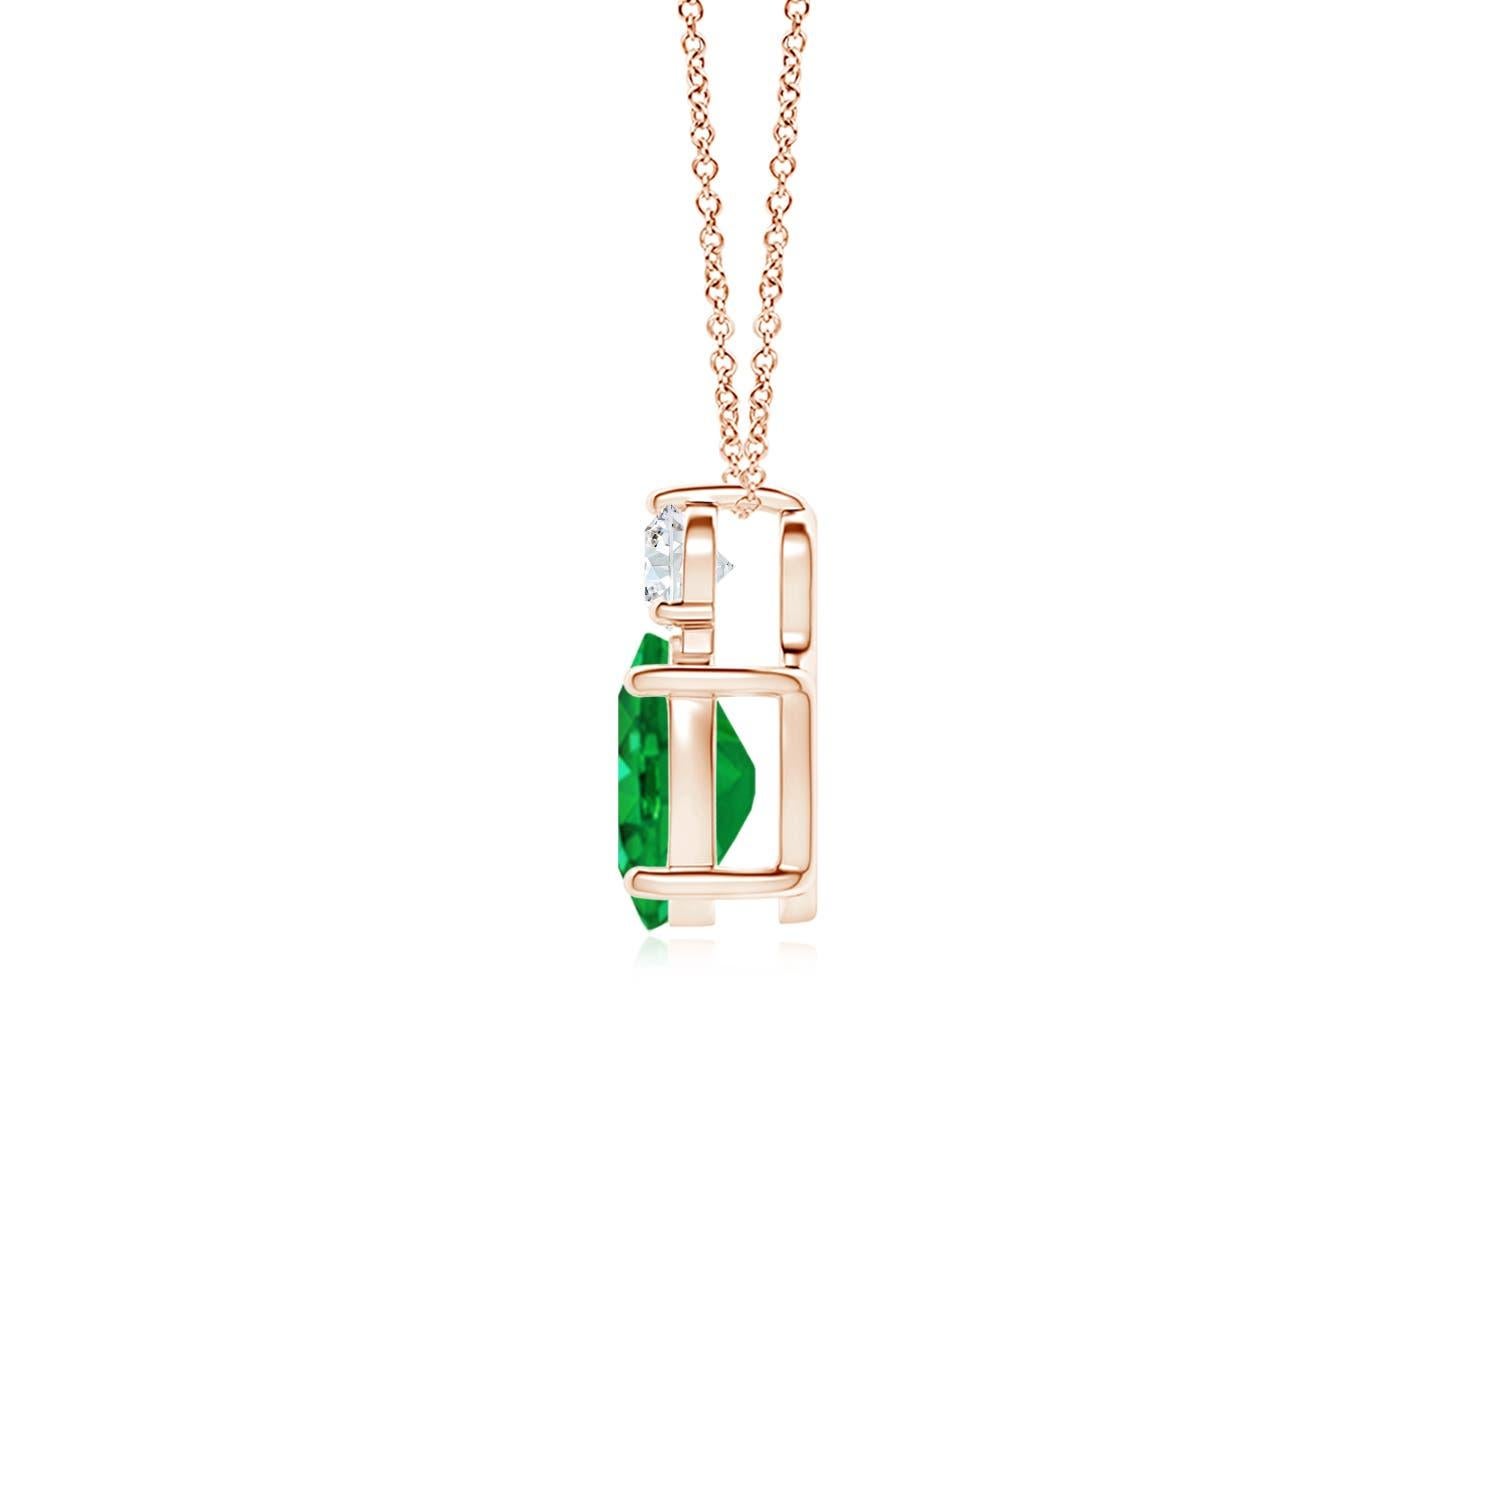 Crafted in 14k rose gold, this classic solitaire emerald pendant personifies elegance. The rich green oval emerald is topped by a sparkling diamond for added allure. The intricate scroll work on the sides enhances this prong set emerald pendant's